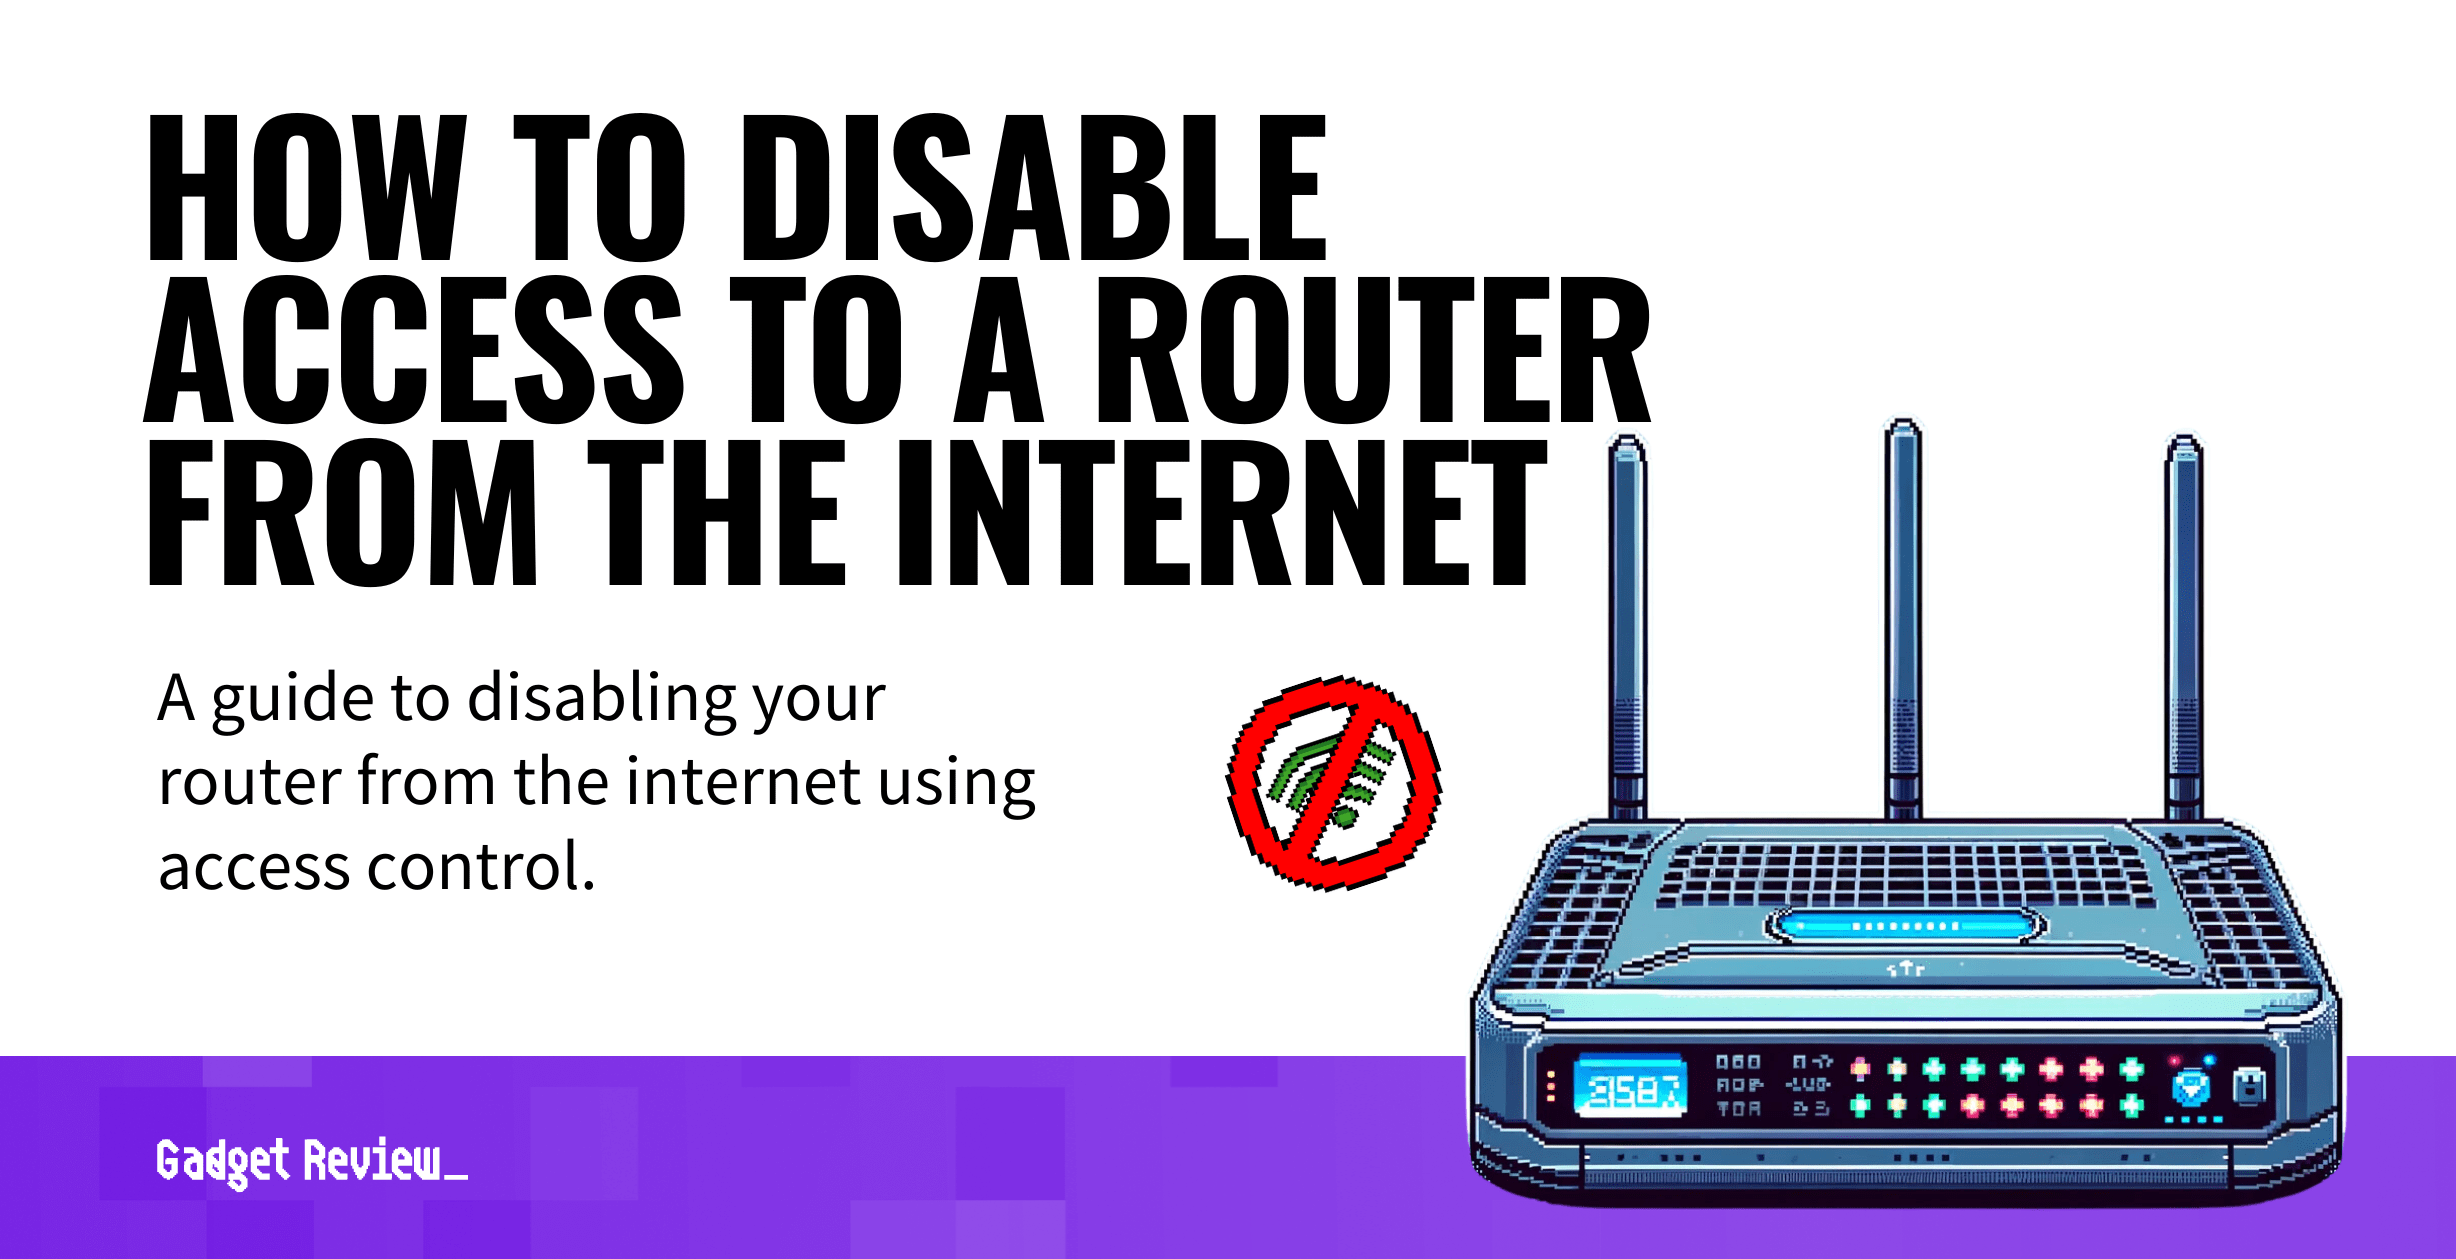 how to disable access to router from internet guide